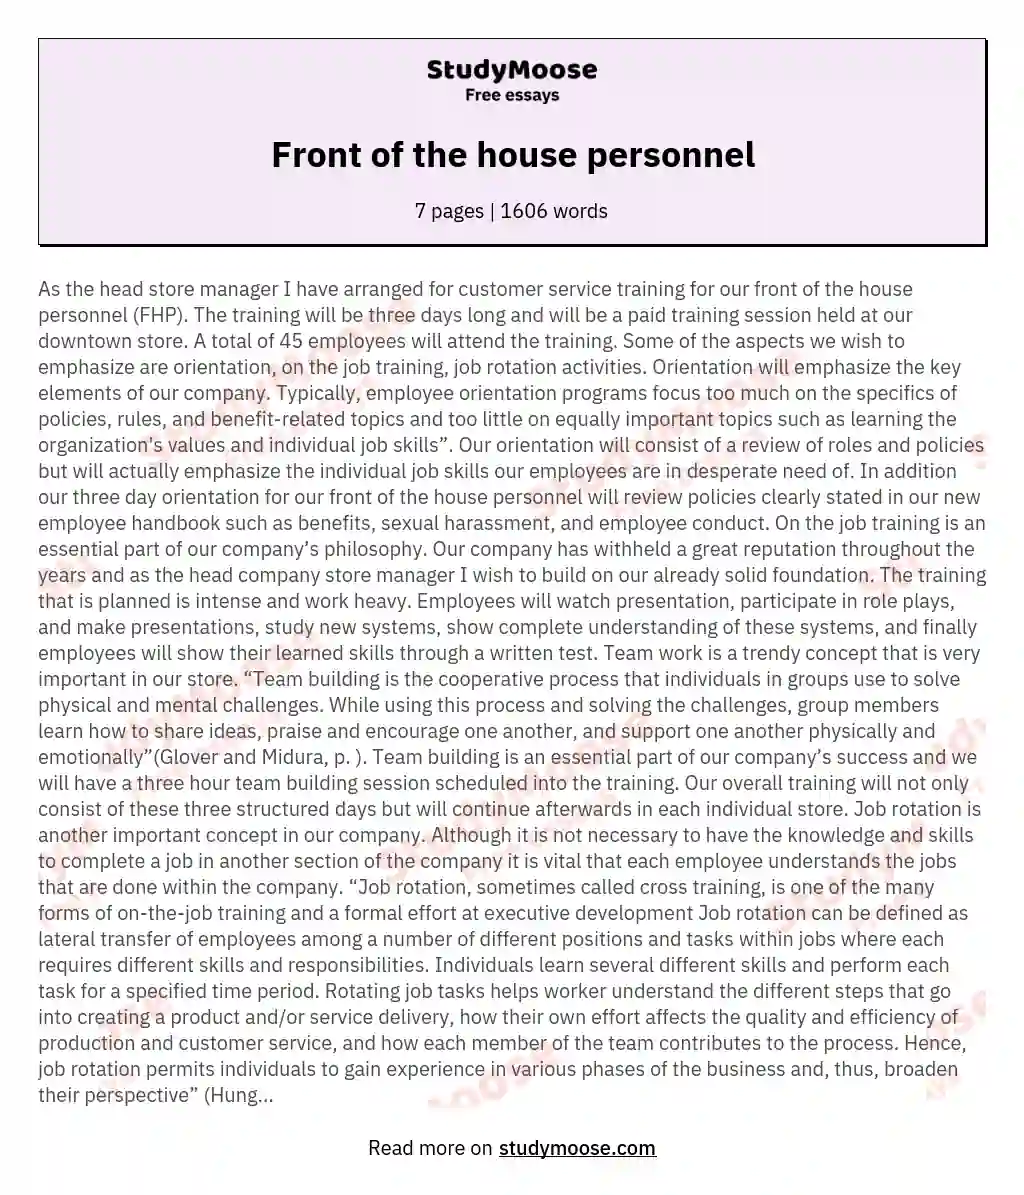 Front of the house personnel essay